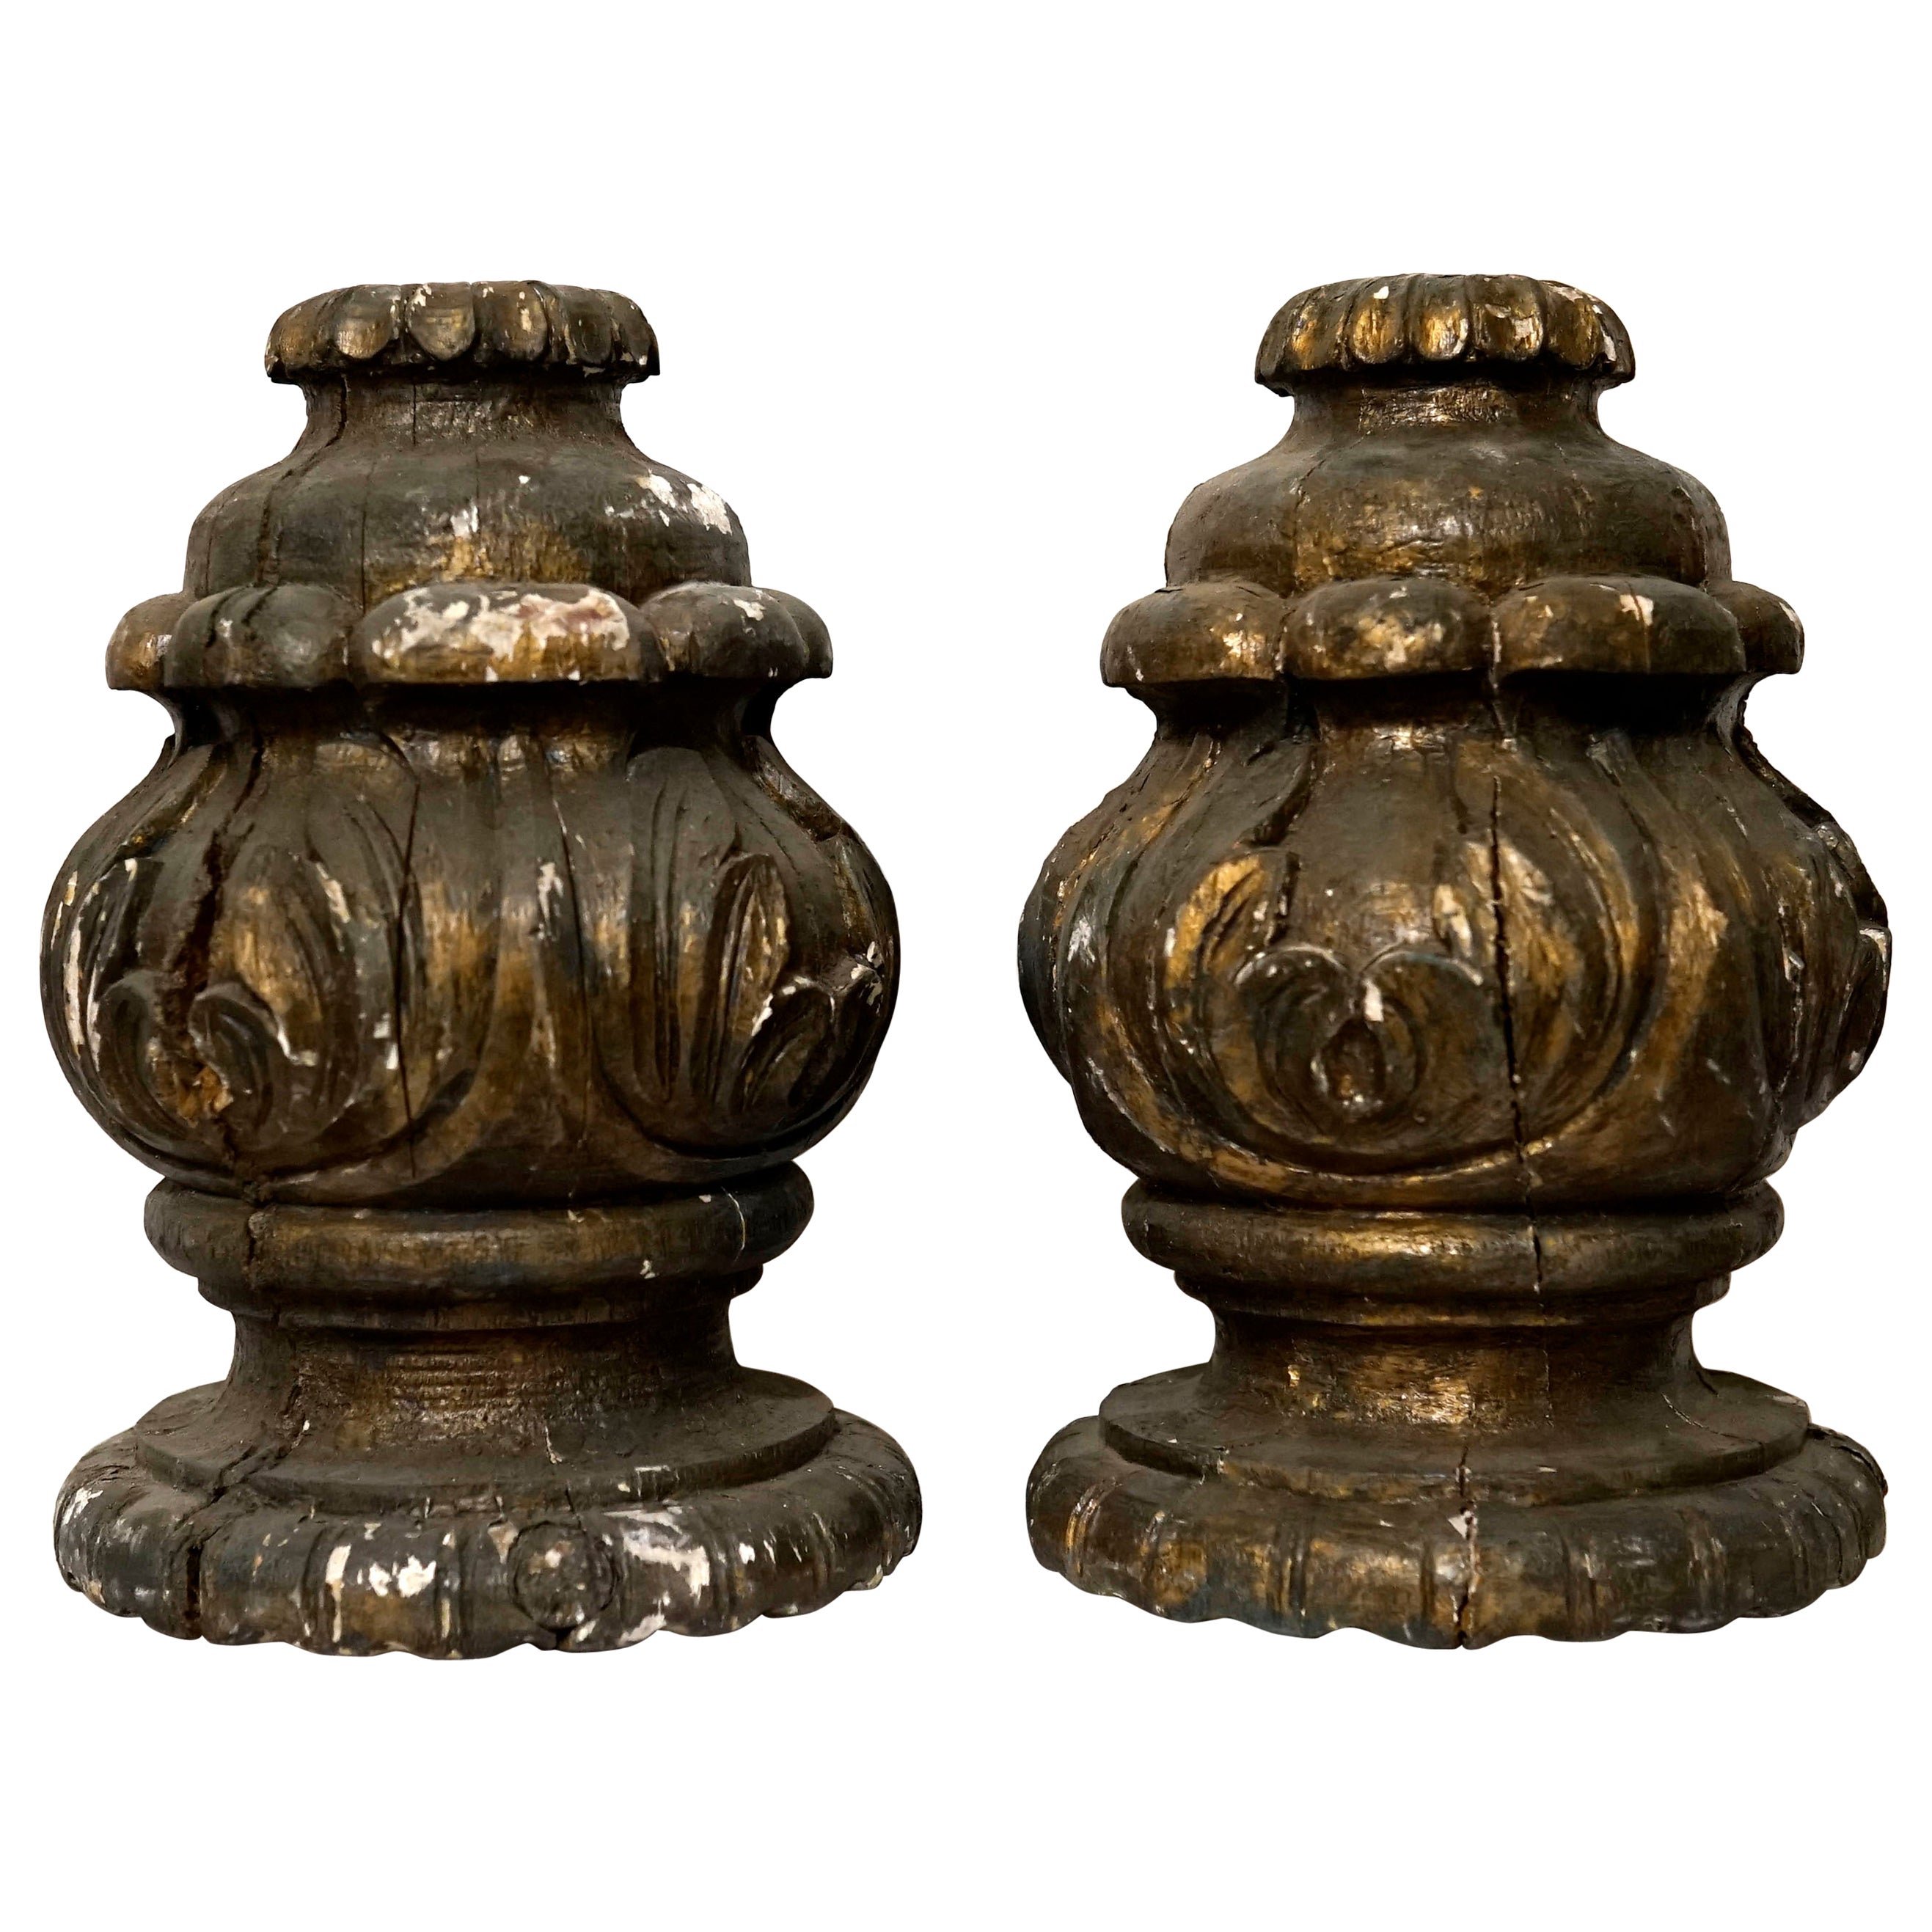 Italian details and beautiful acanthus hand carved leaves designed in an upward sweep make this pair of architectural finials stand out. These are circa mid to late 18th century giltwood pieces, each on a rounded foot. We believe these were part of